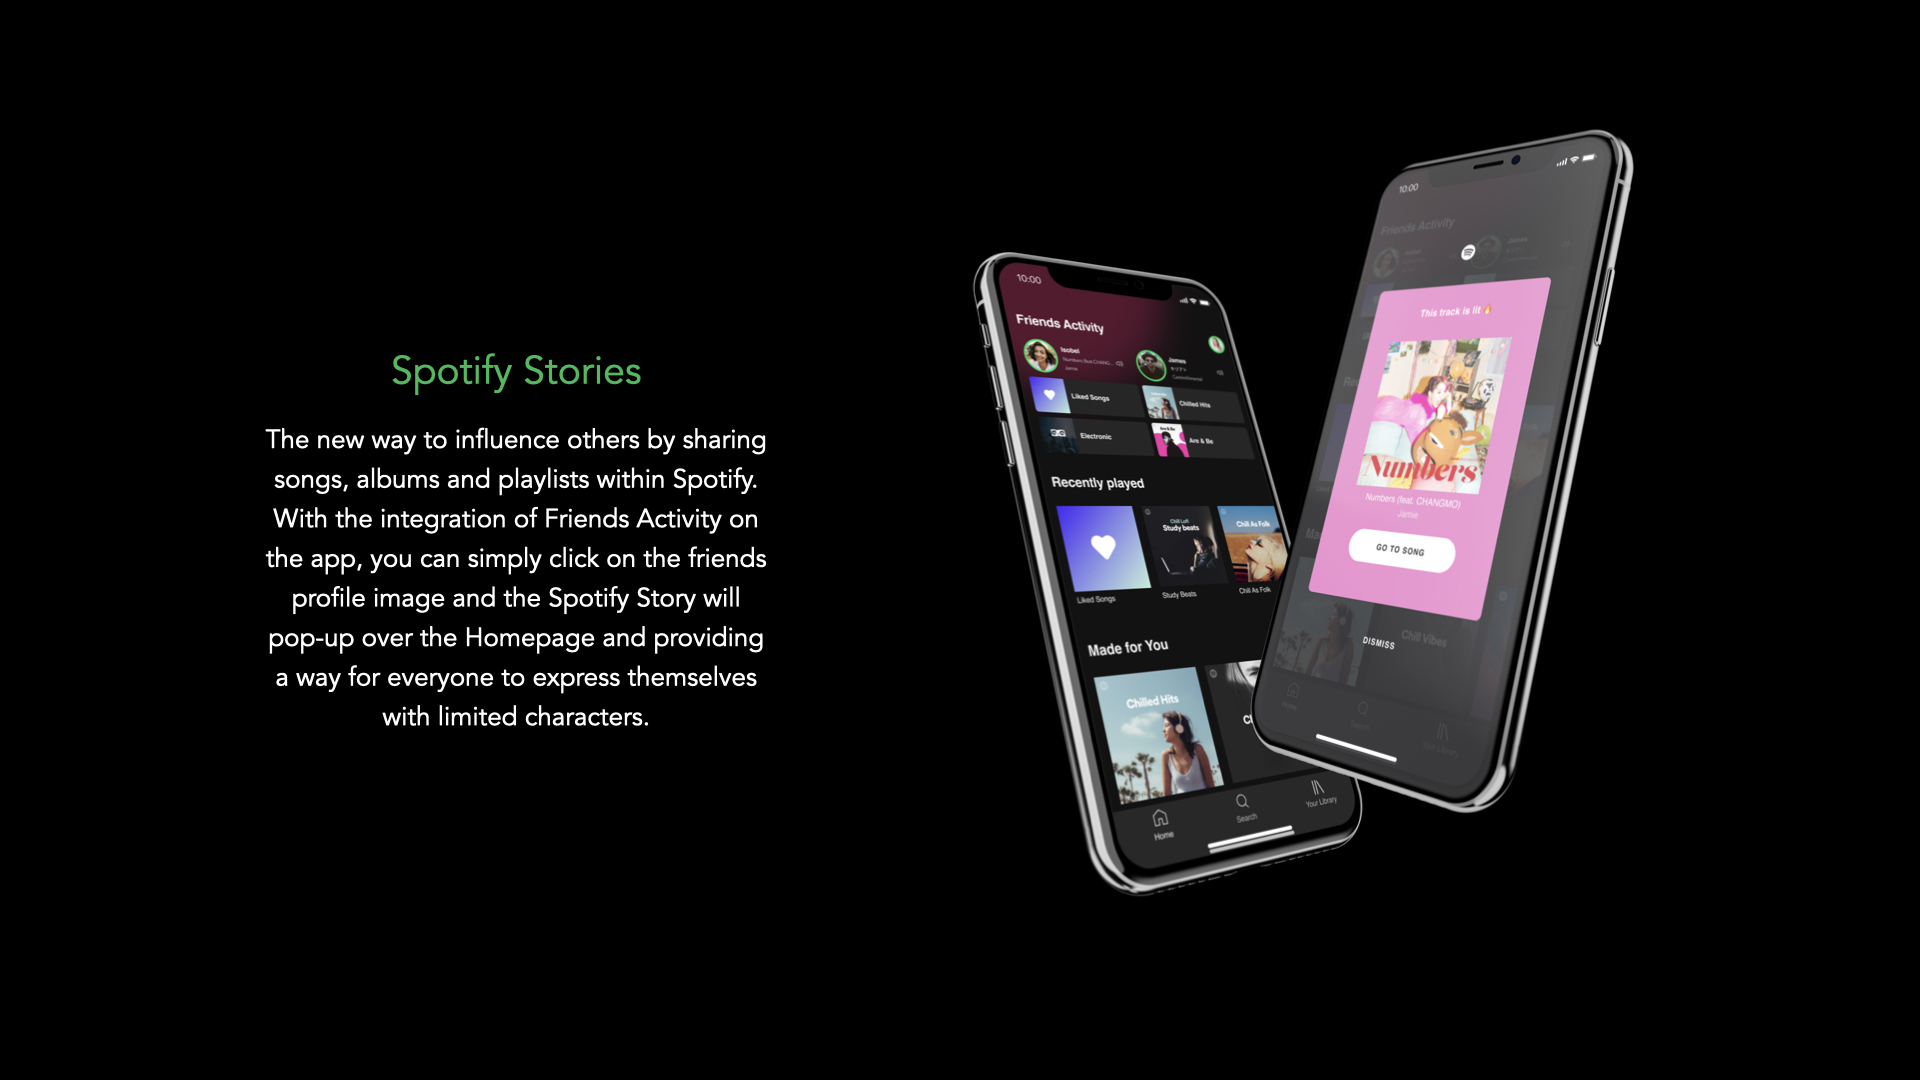 The new way to influence others by sharing songs, albums and playlists within Spotify. With the integration of Friends Activity on the app, you can simply click on the friends profile image and the Spotify Story will pop-up over the Homepage and providing a way for everyone to express themselves with limited characters.